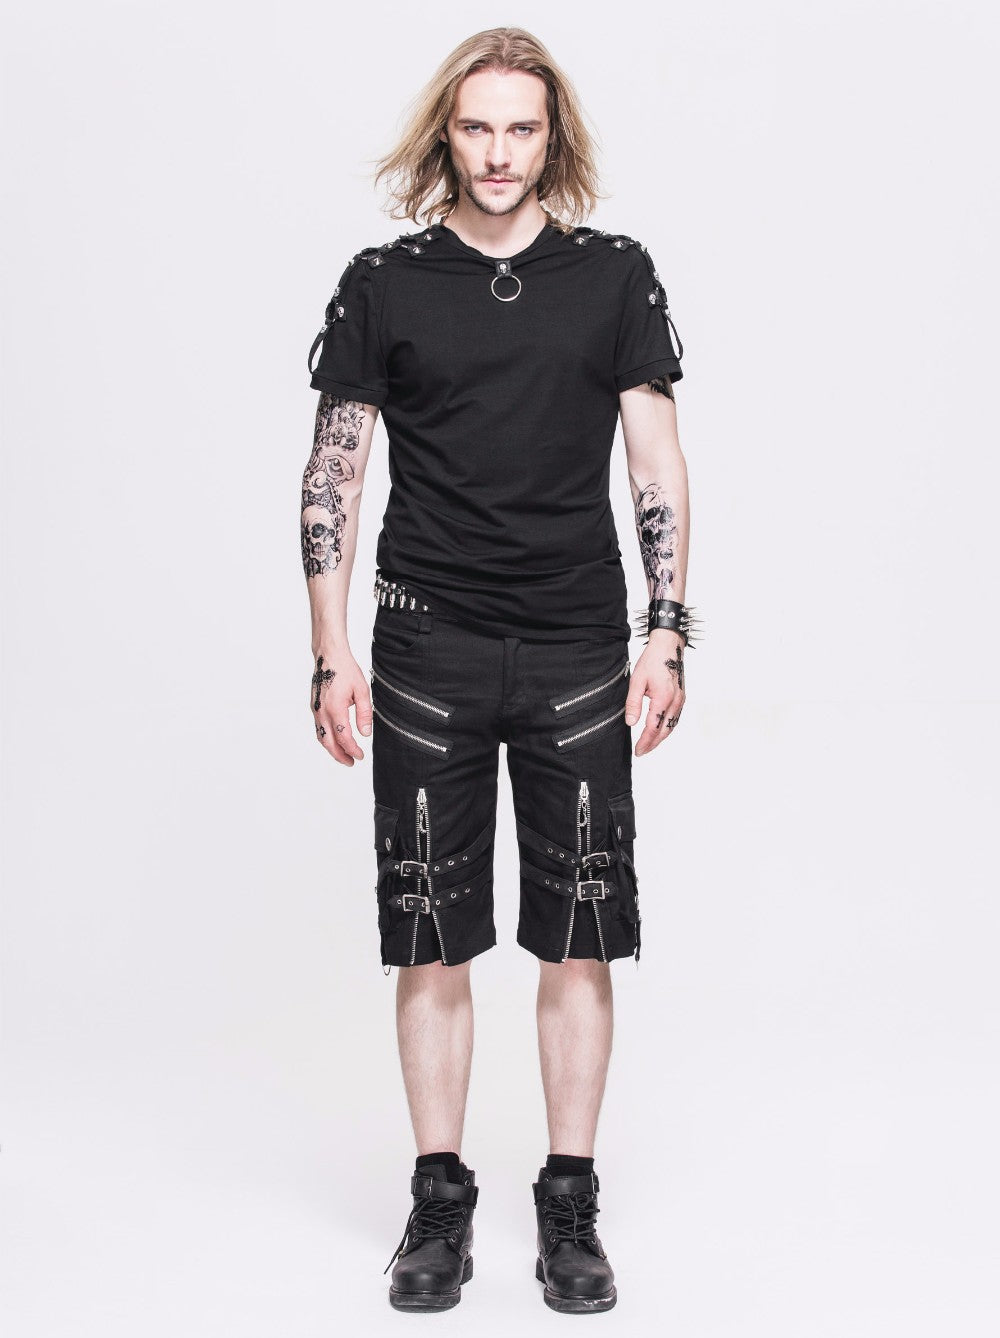 Black Rock Style Shorts / Men's Alternative Fashion Gothic Outfits / Punk Clothes - HARD'N'HEAVY